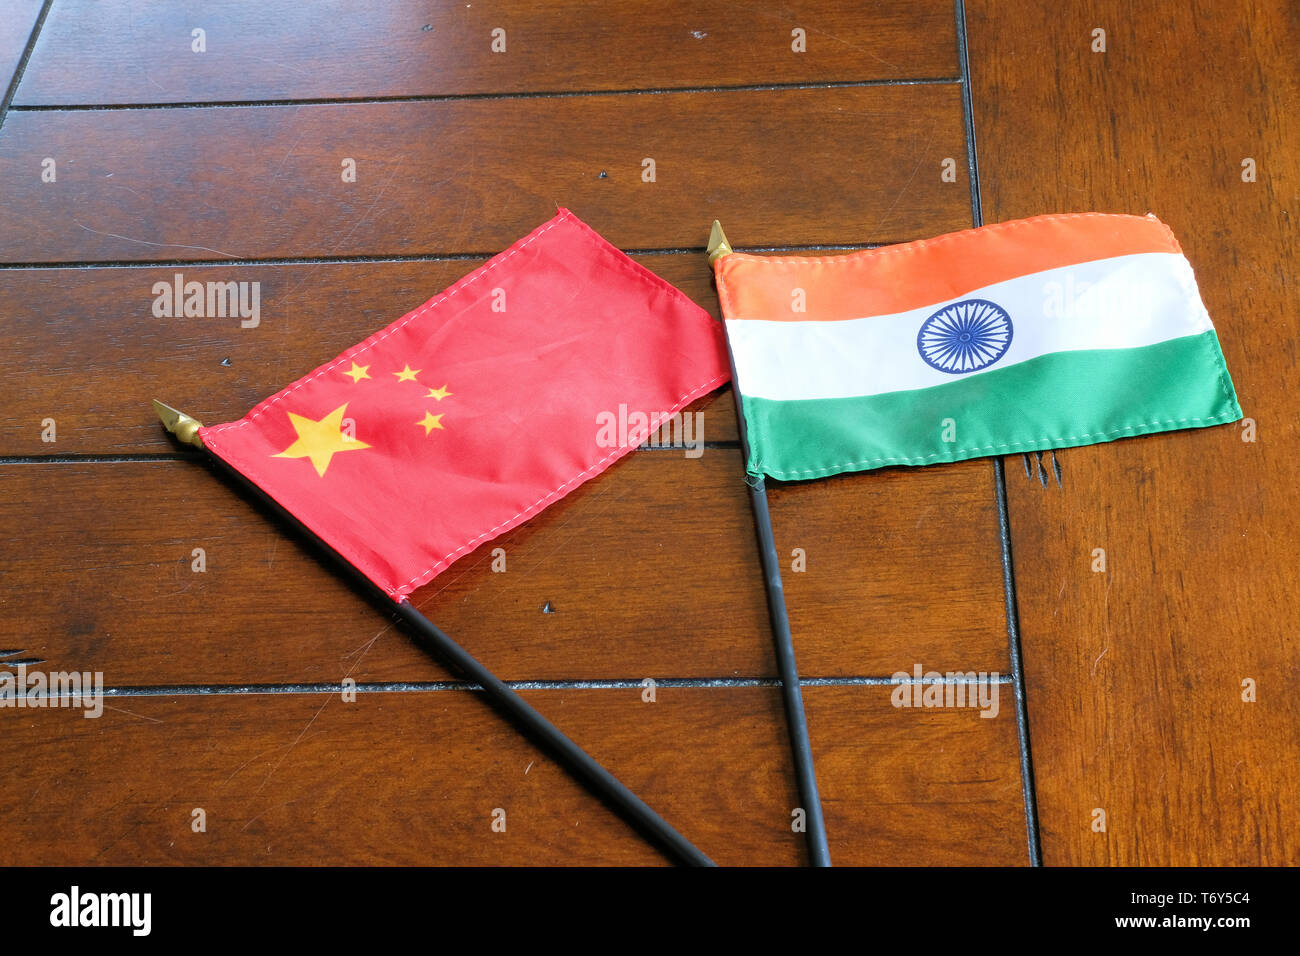 Flags of China and India on a wooden surface; Chinese-Indian relations. Stock Photo